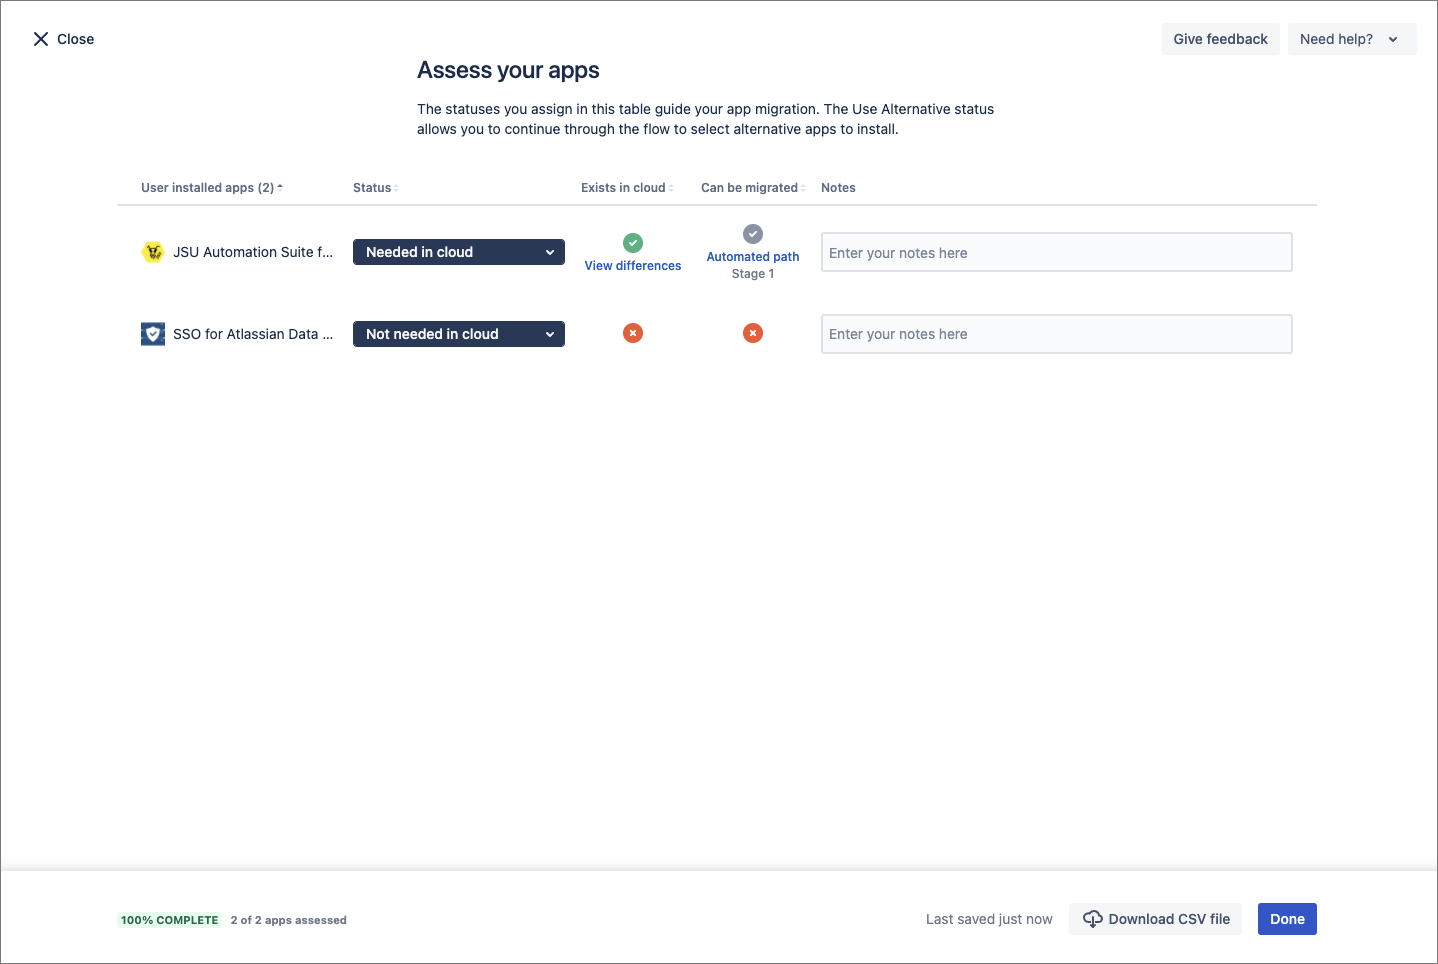 Asses your apps page in Jira with JSU set to Needed in Cloud.